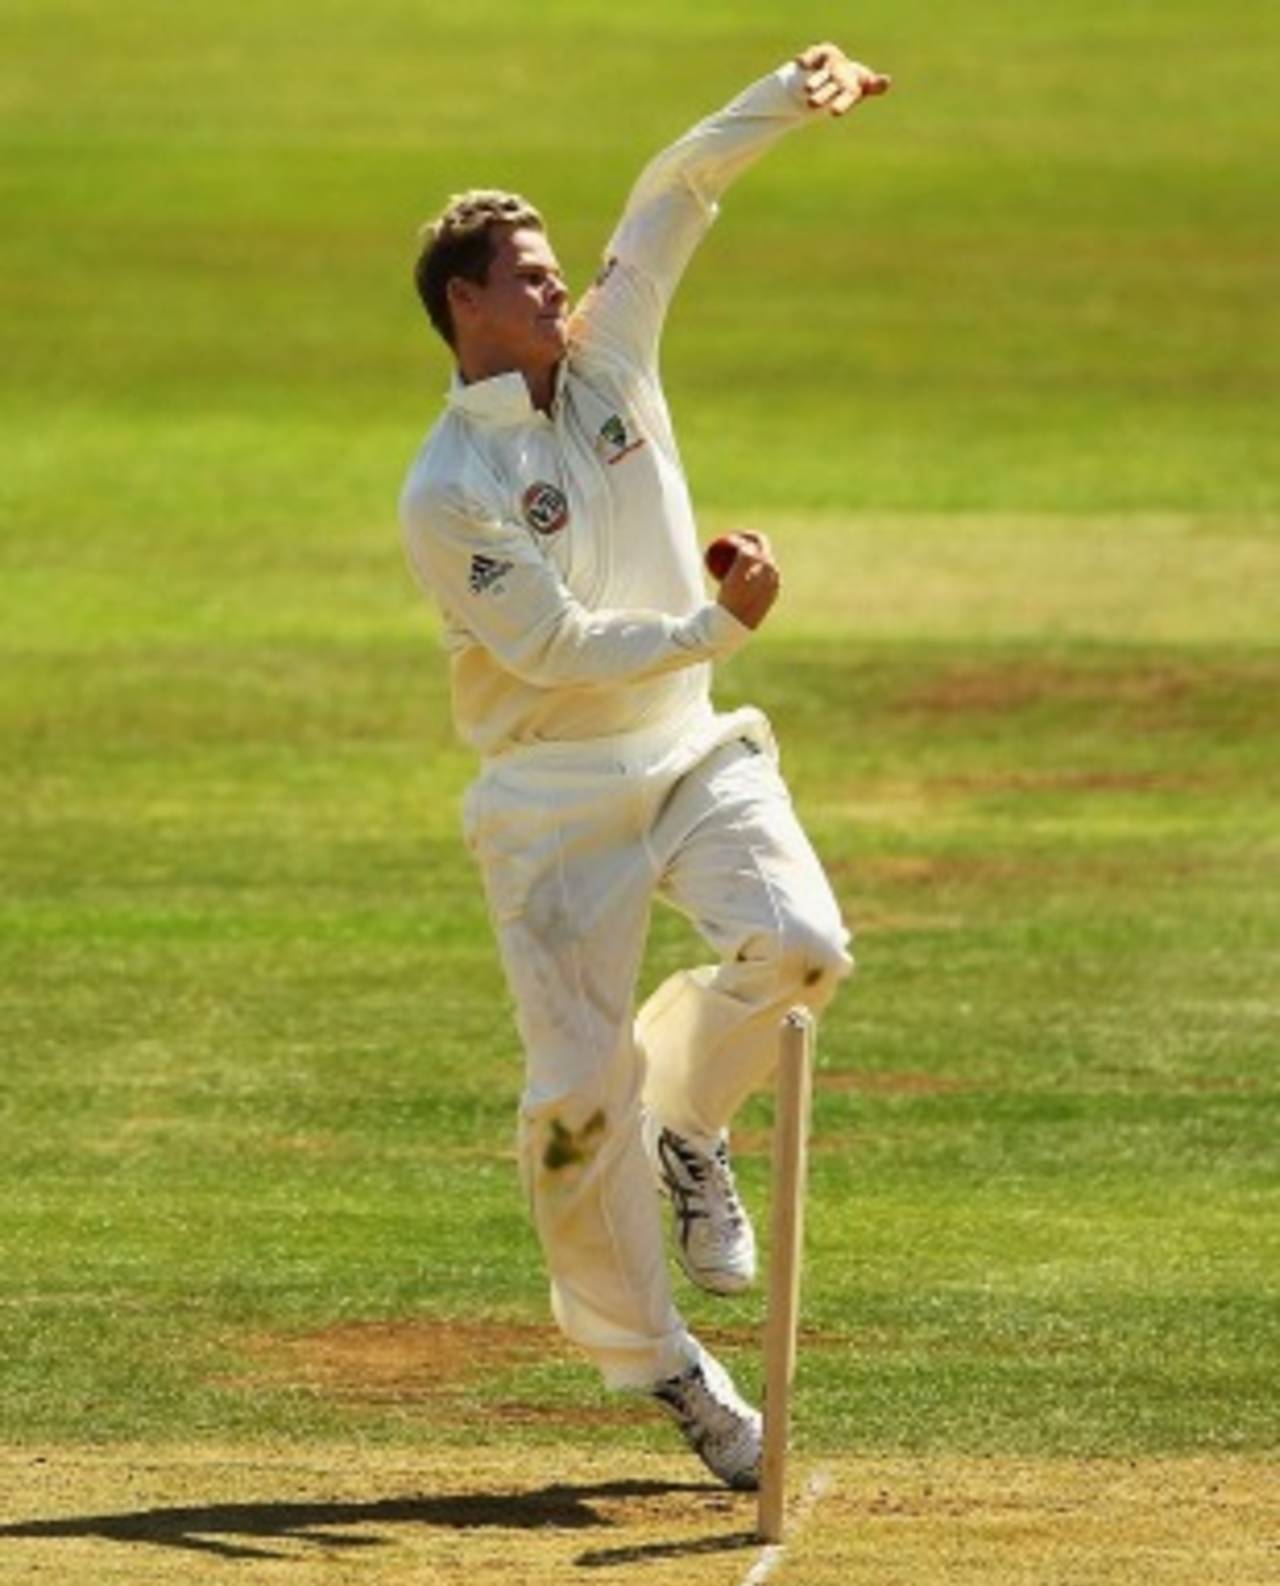 Steven Smith prepares to delivery, Derbyshire v Australians, Tour match, Derby, 2nd day, July 9, 2010